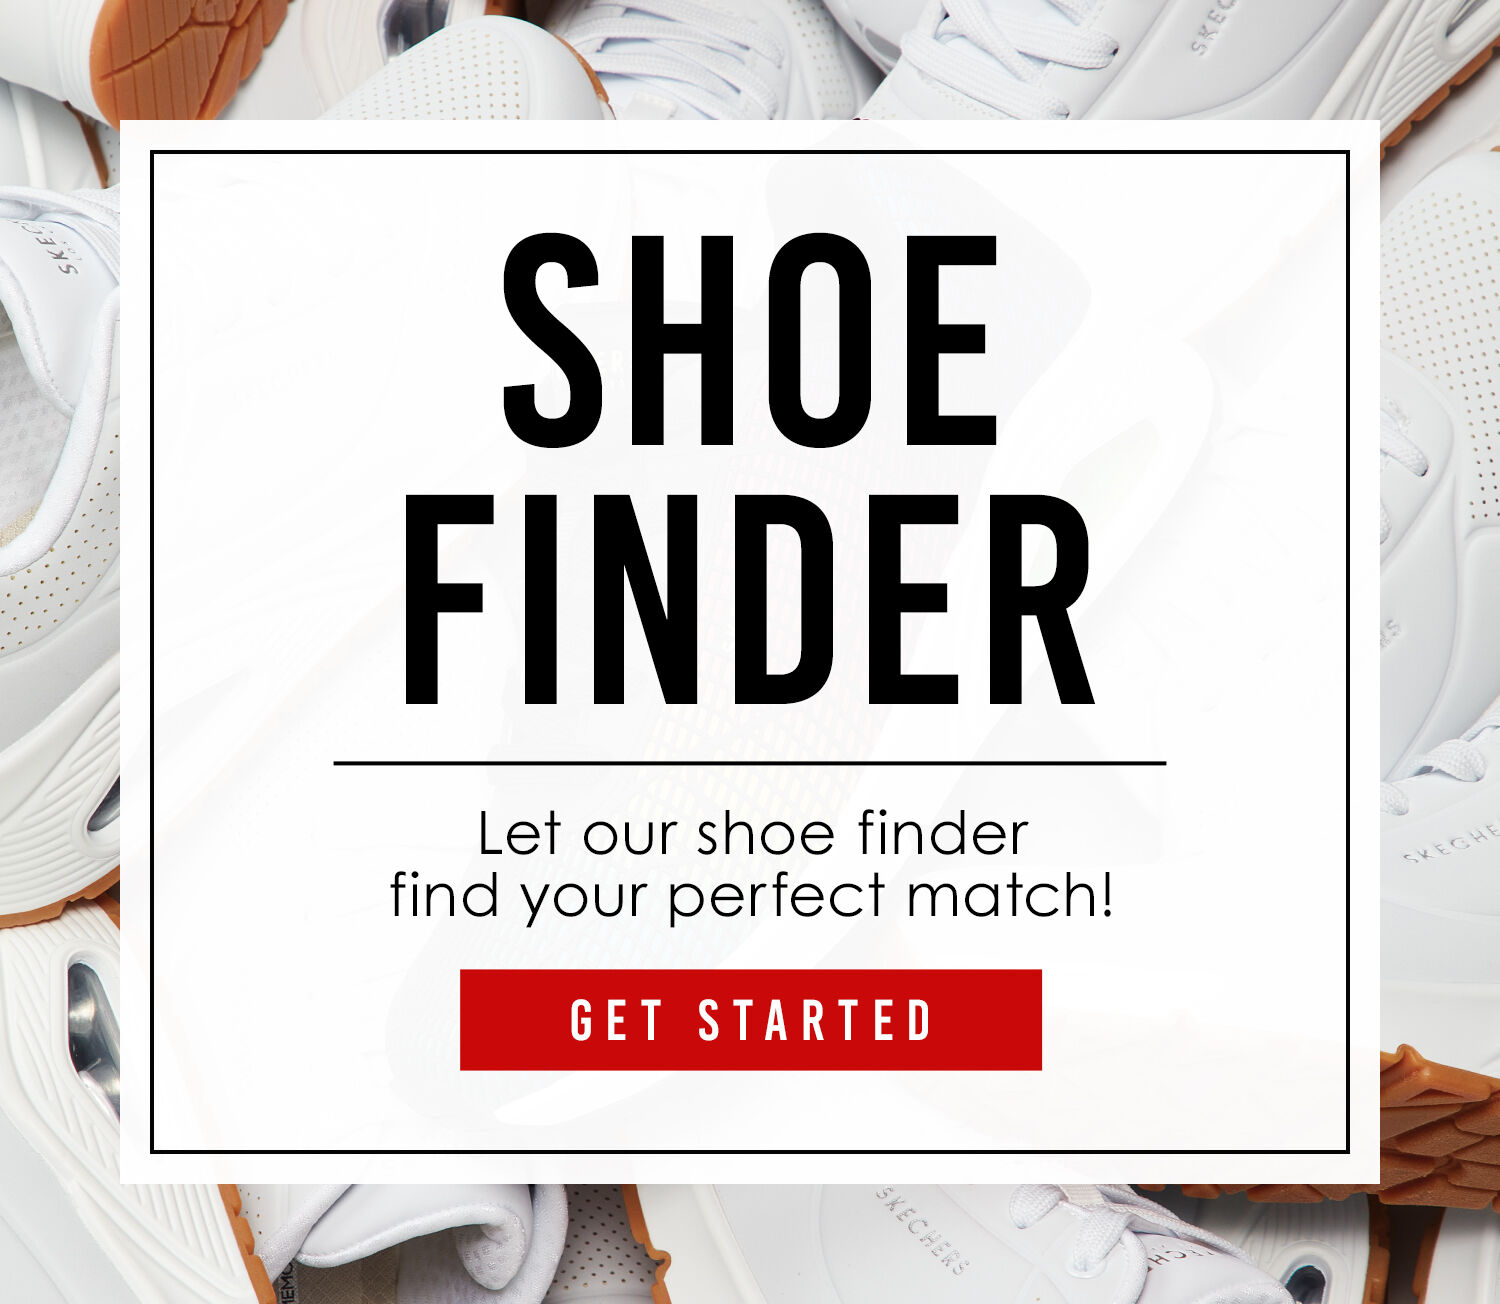 skechers email sign up